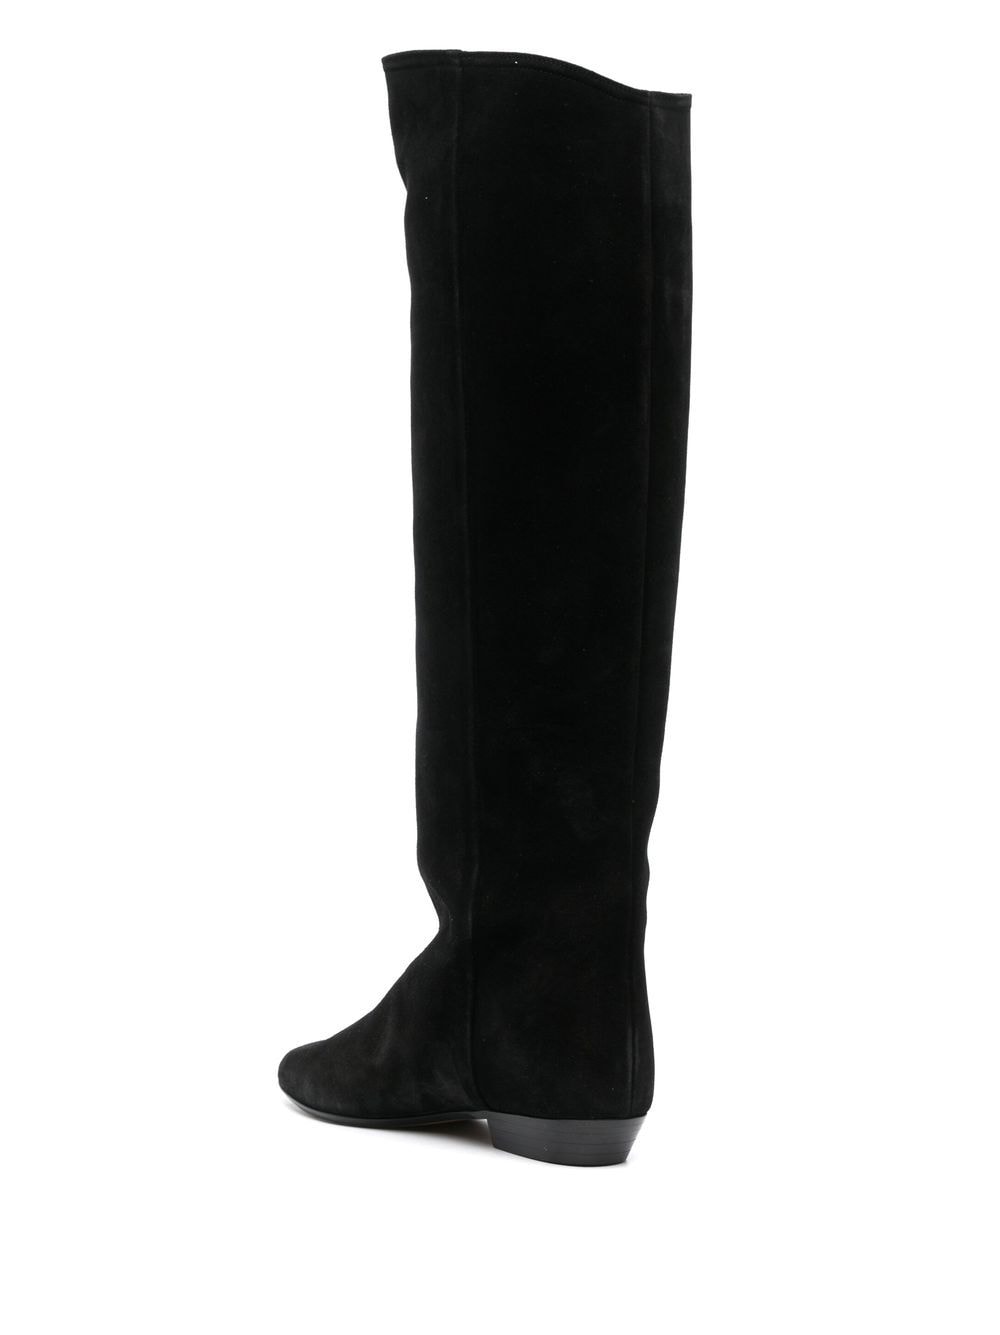 ISABEL MARANT Women's Black Suede Knee Boots - FW23 Collection